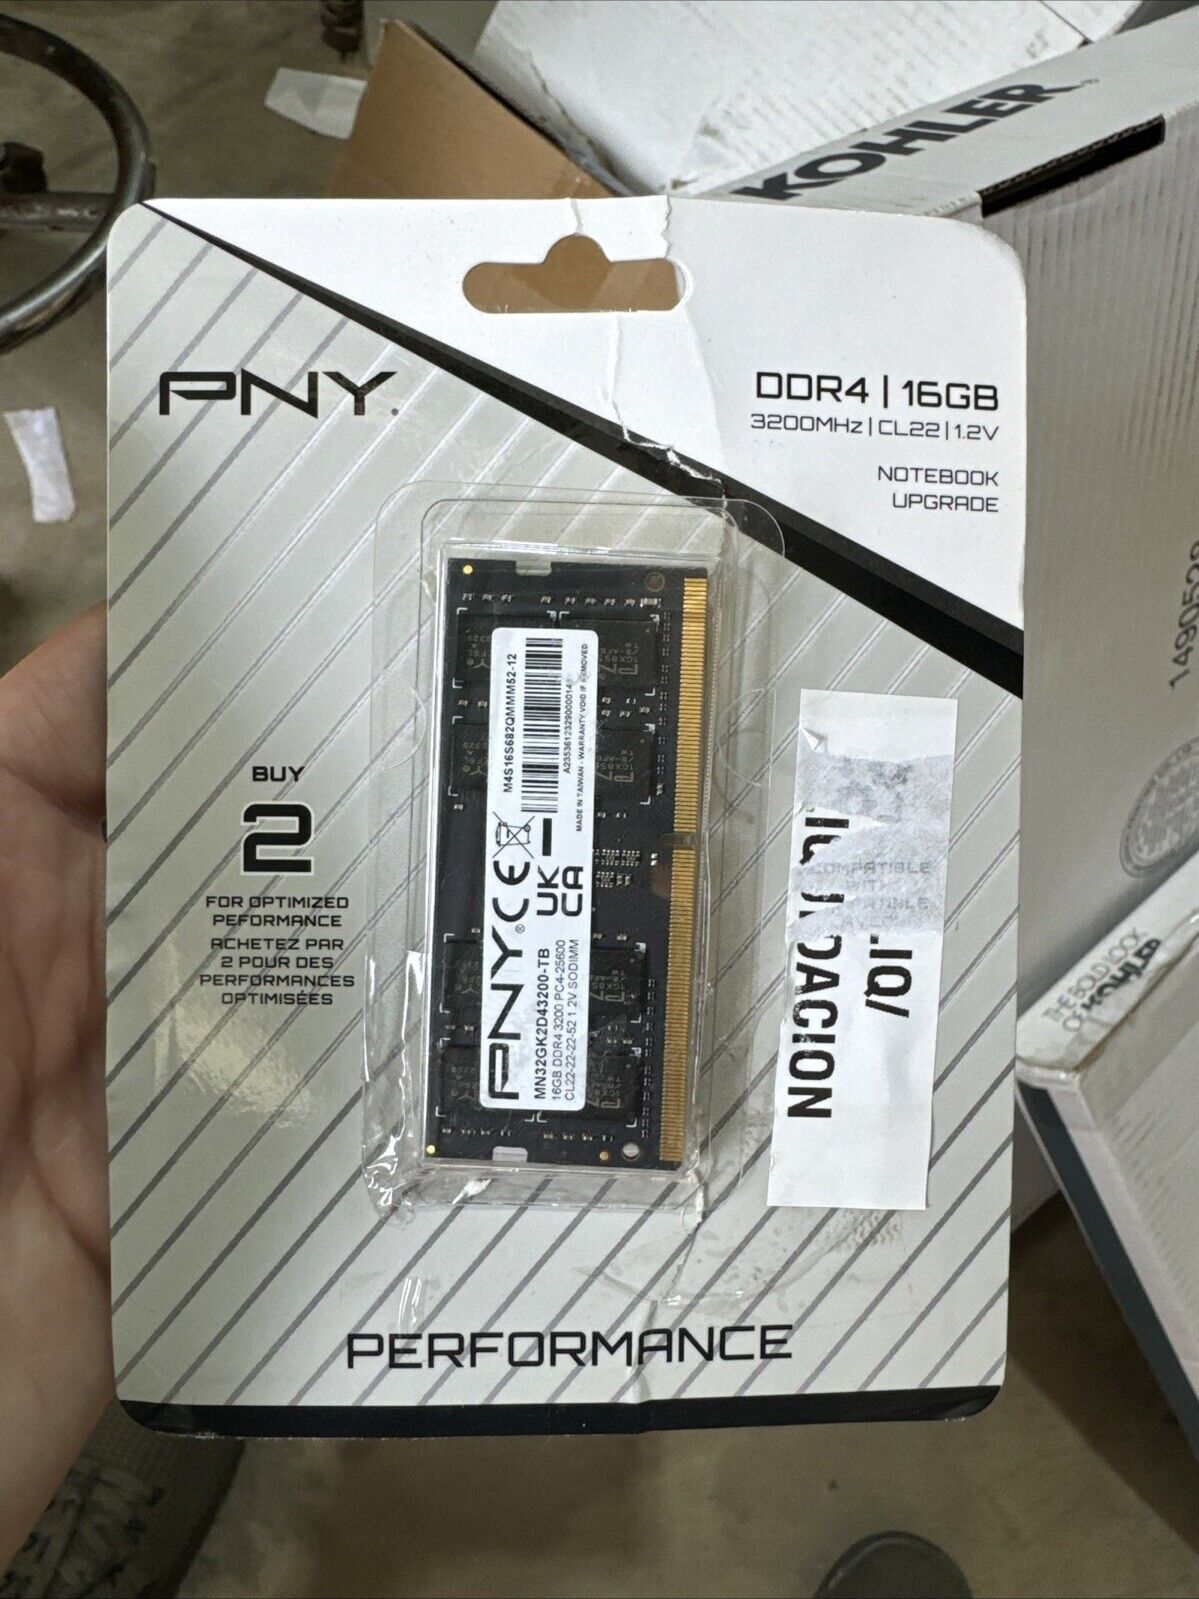 PNY Performance 16GB DDR4 Memory Kit - Notebook Upgrade